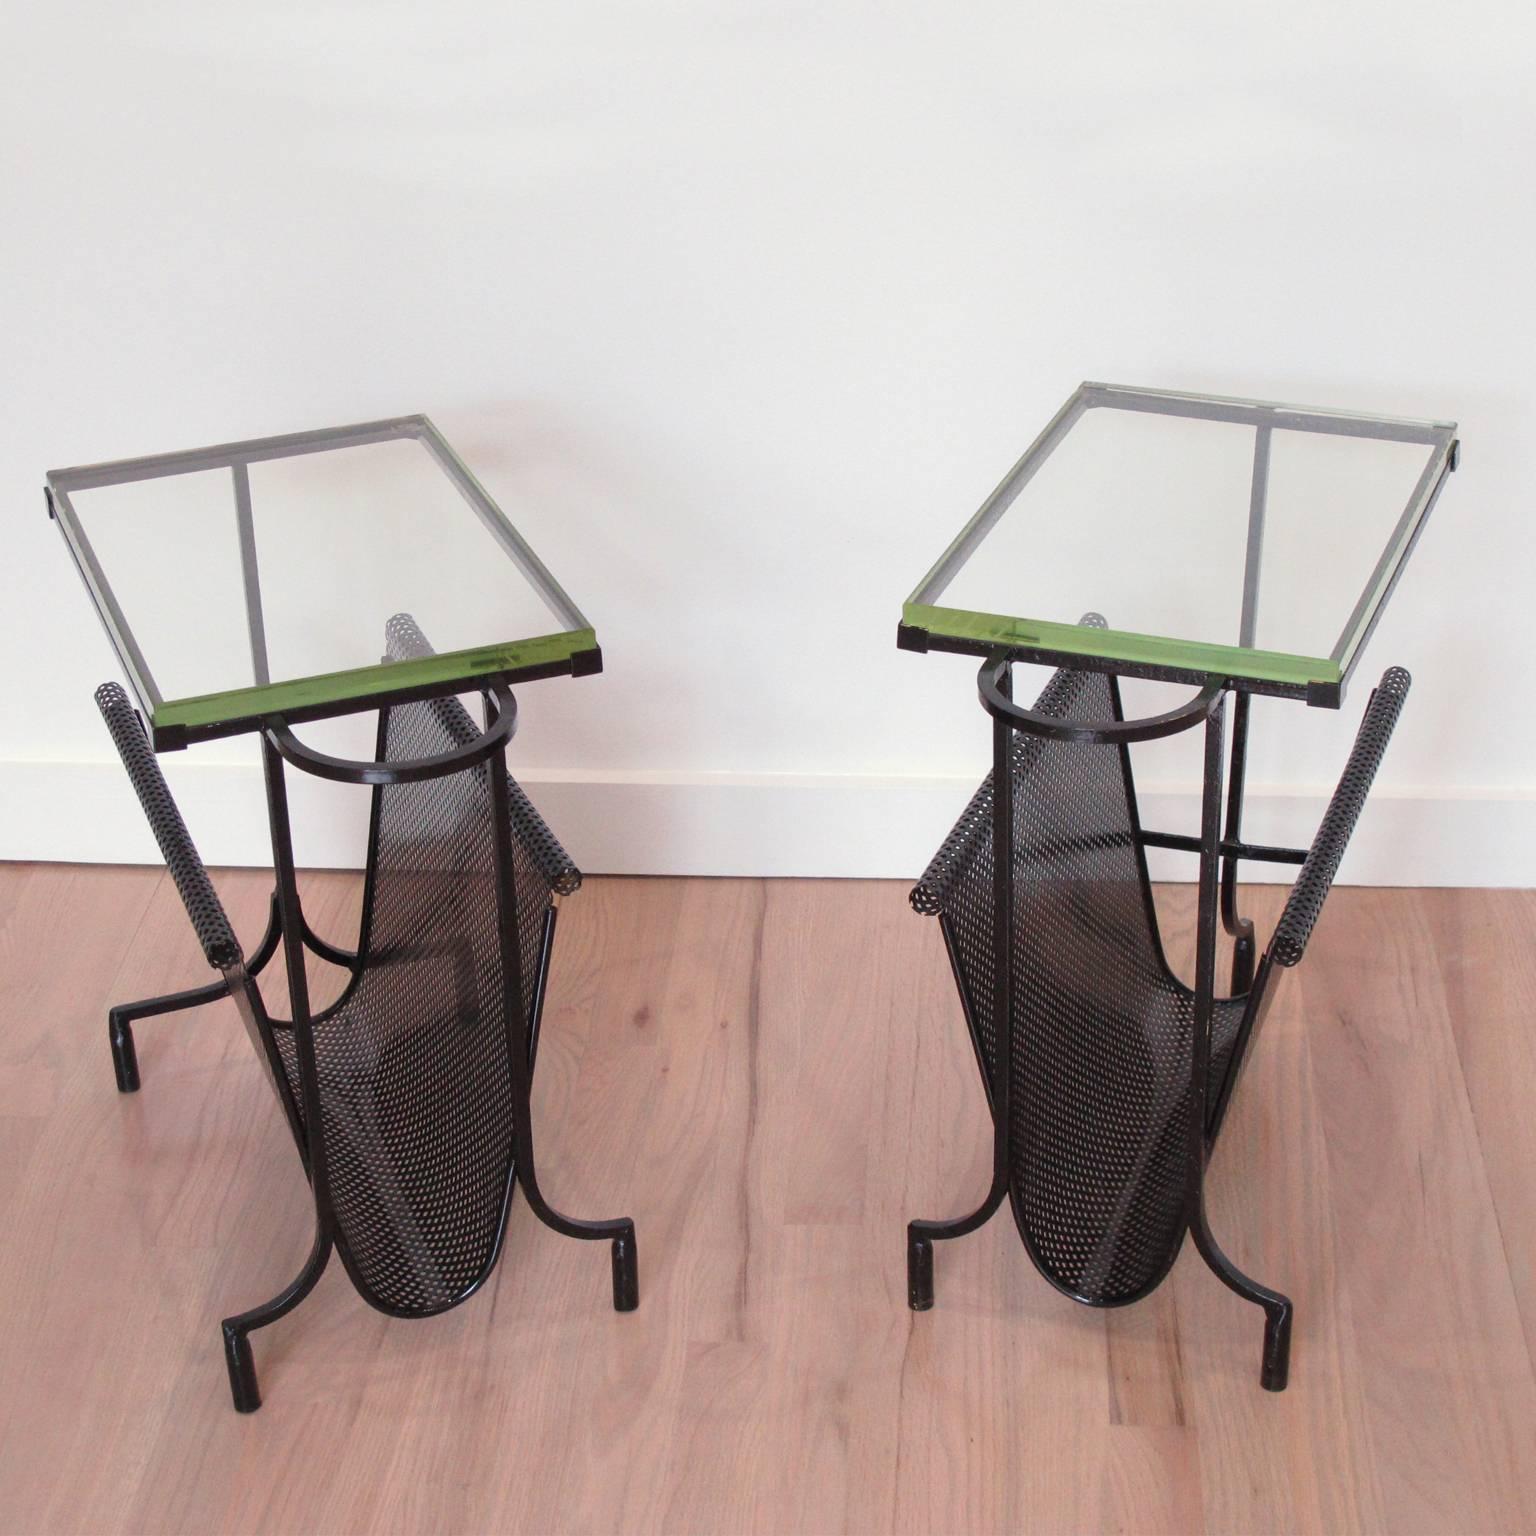 Stunning vintage 1950s pair of perforated metal and glass magazine stand or side table, by French designer Mathieu Matégot. Original black lacquered patina with original Saint Gobain thick glass slab table top. Perfect to use for magazines or books